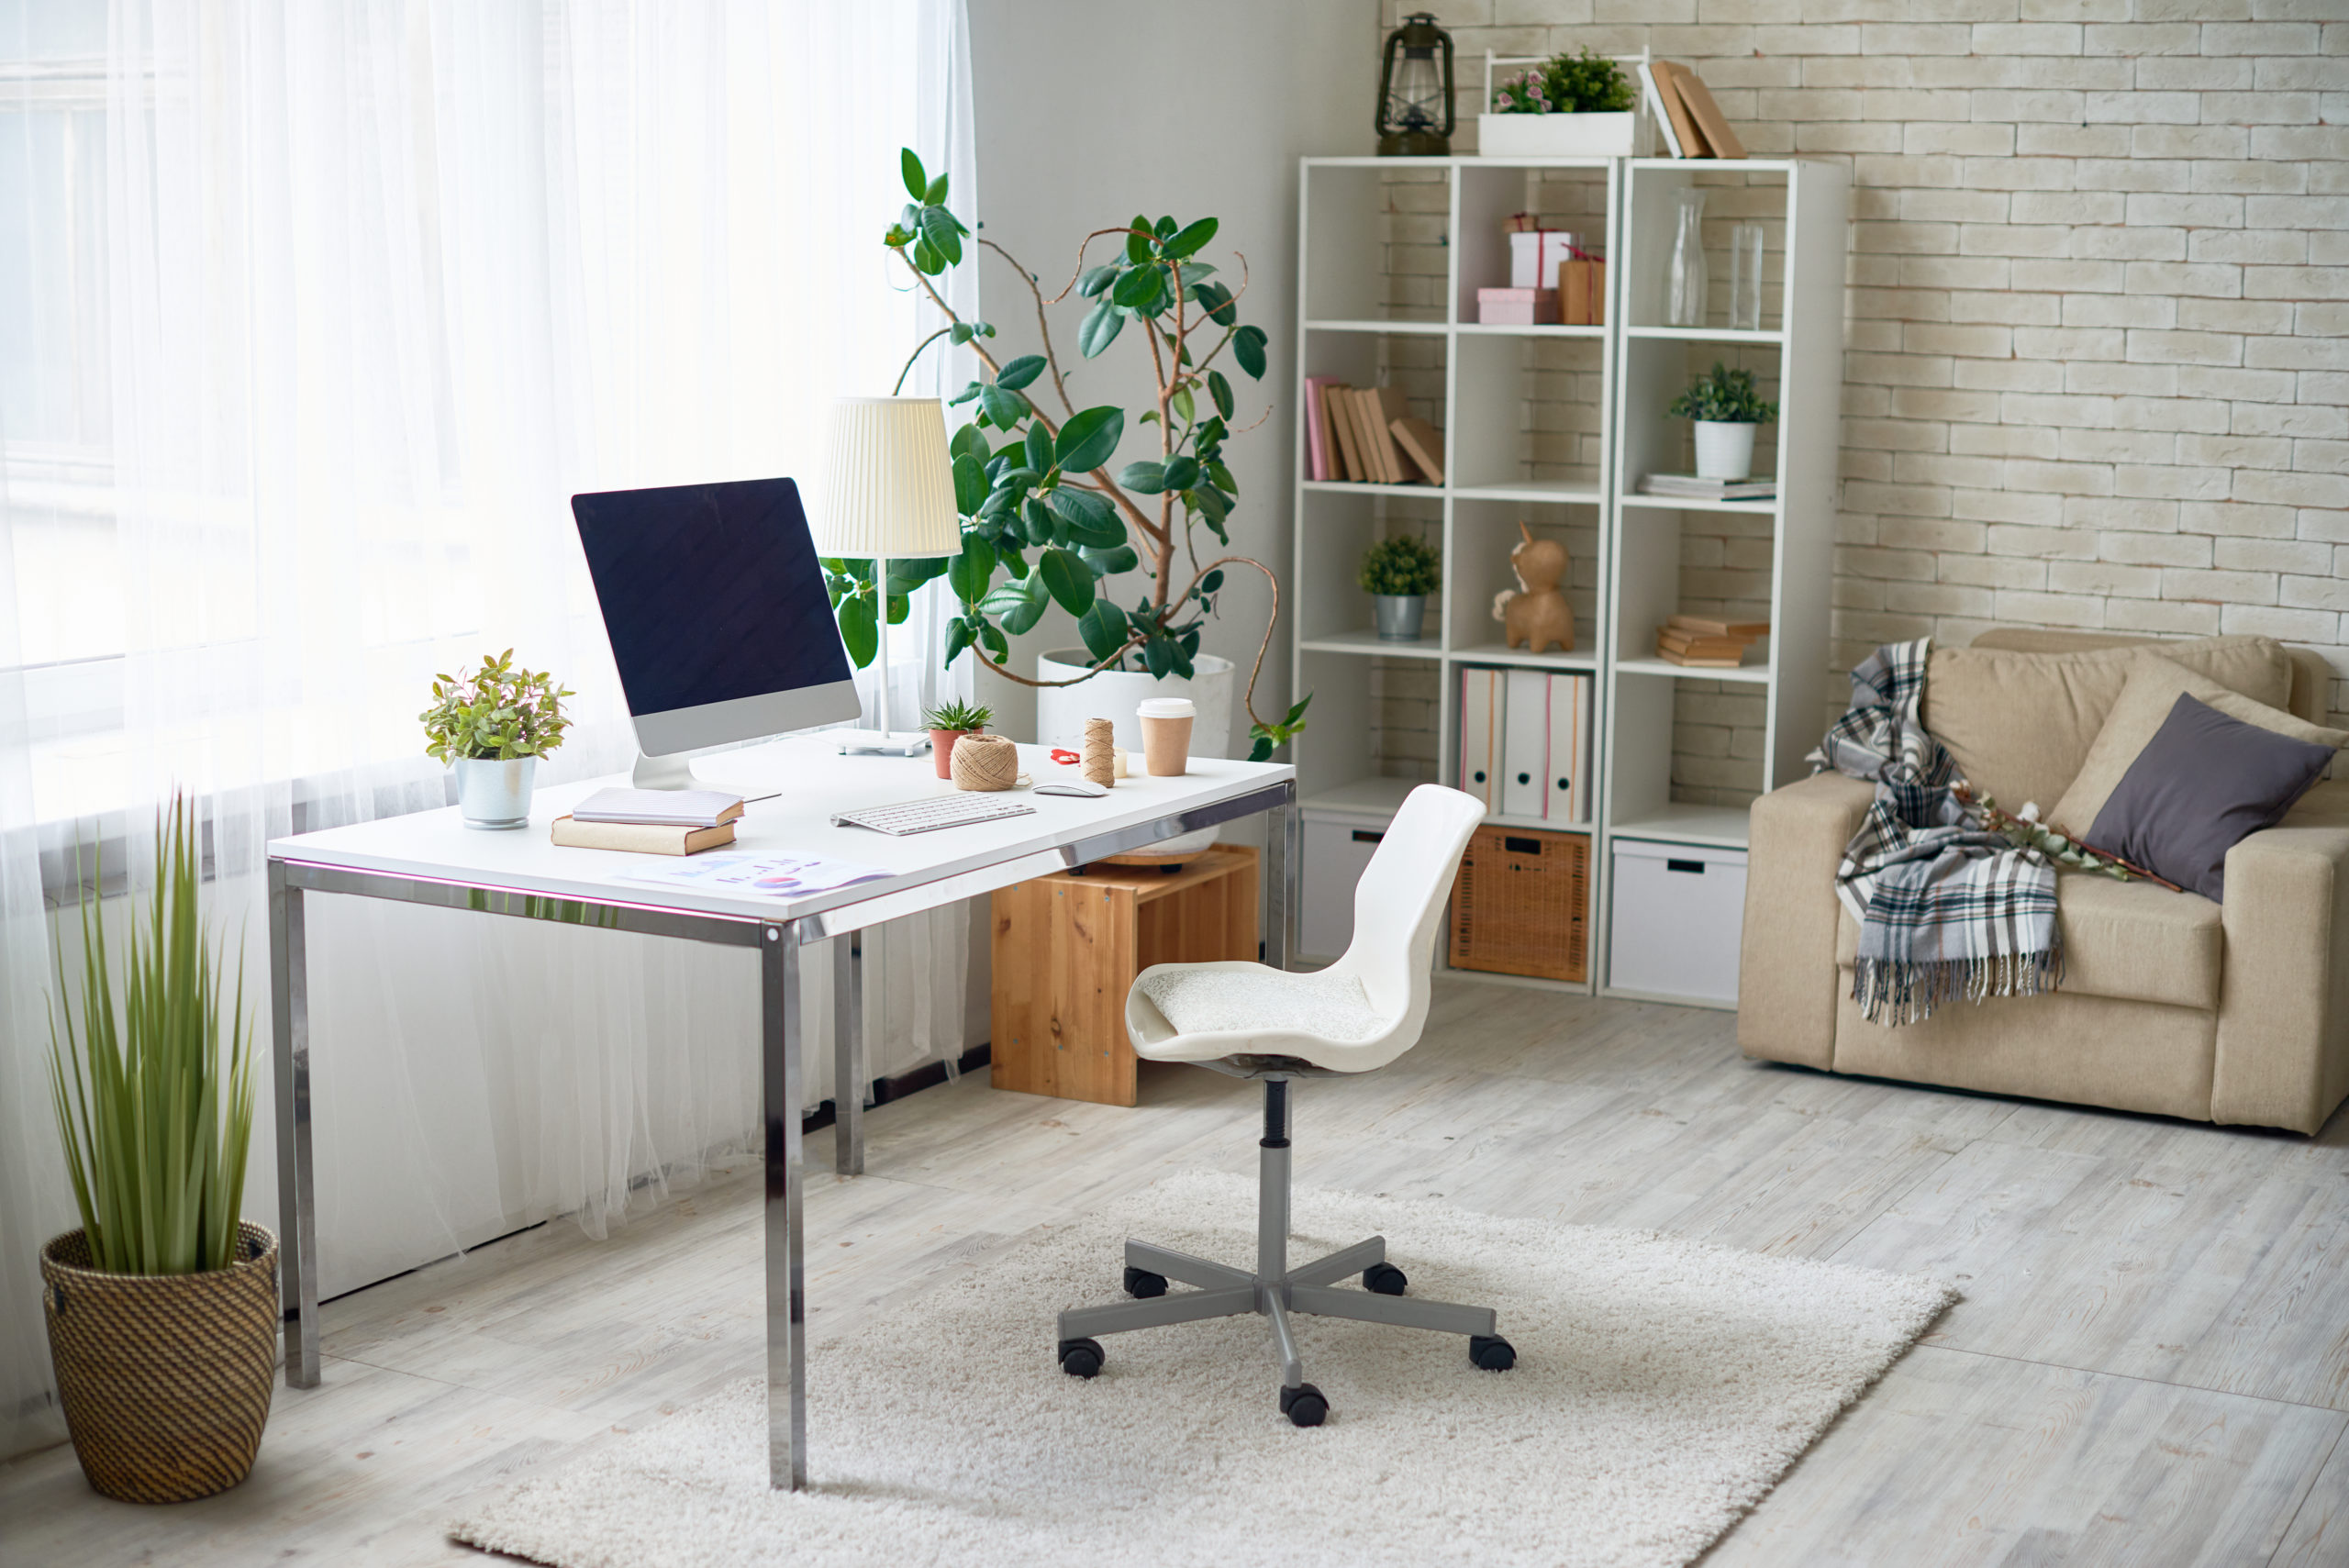 Background image of empty office space in cozy apartment with modern Scandinavian design